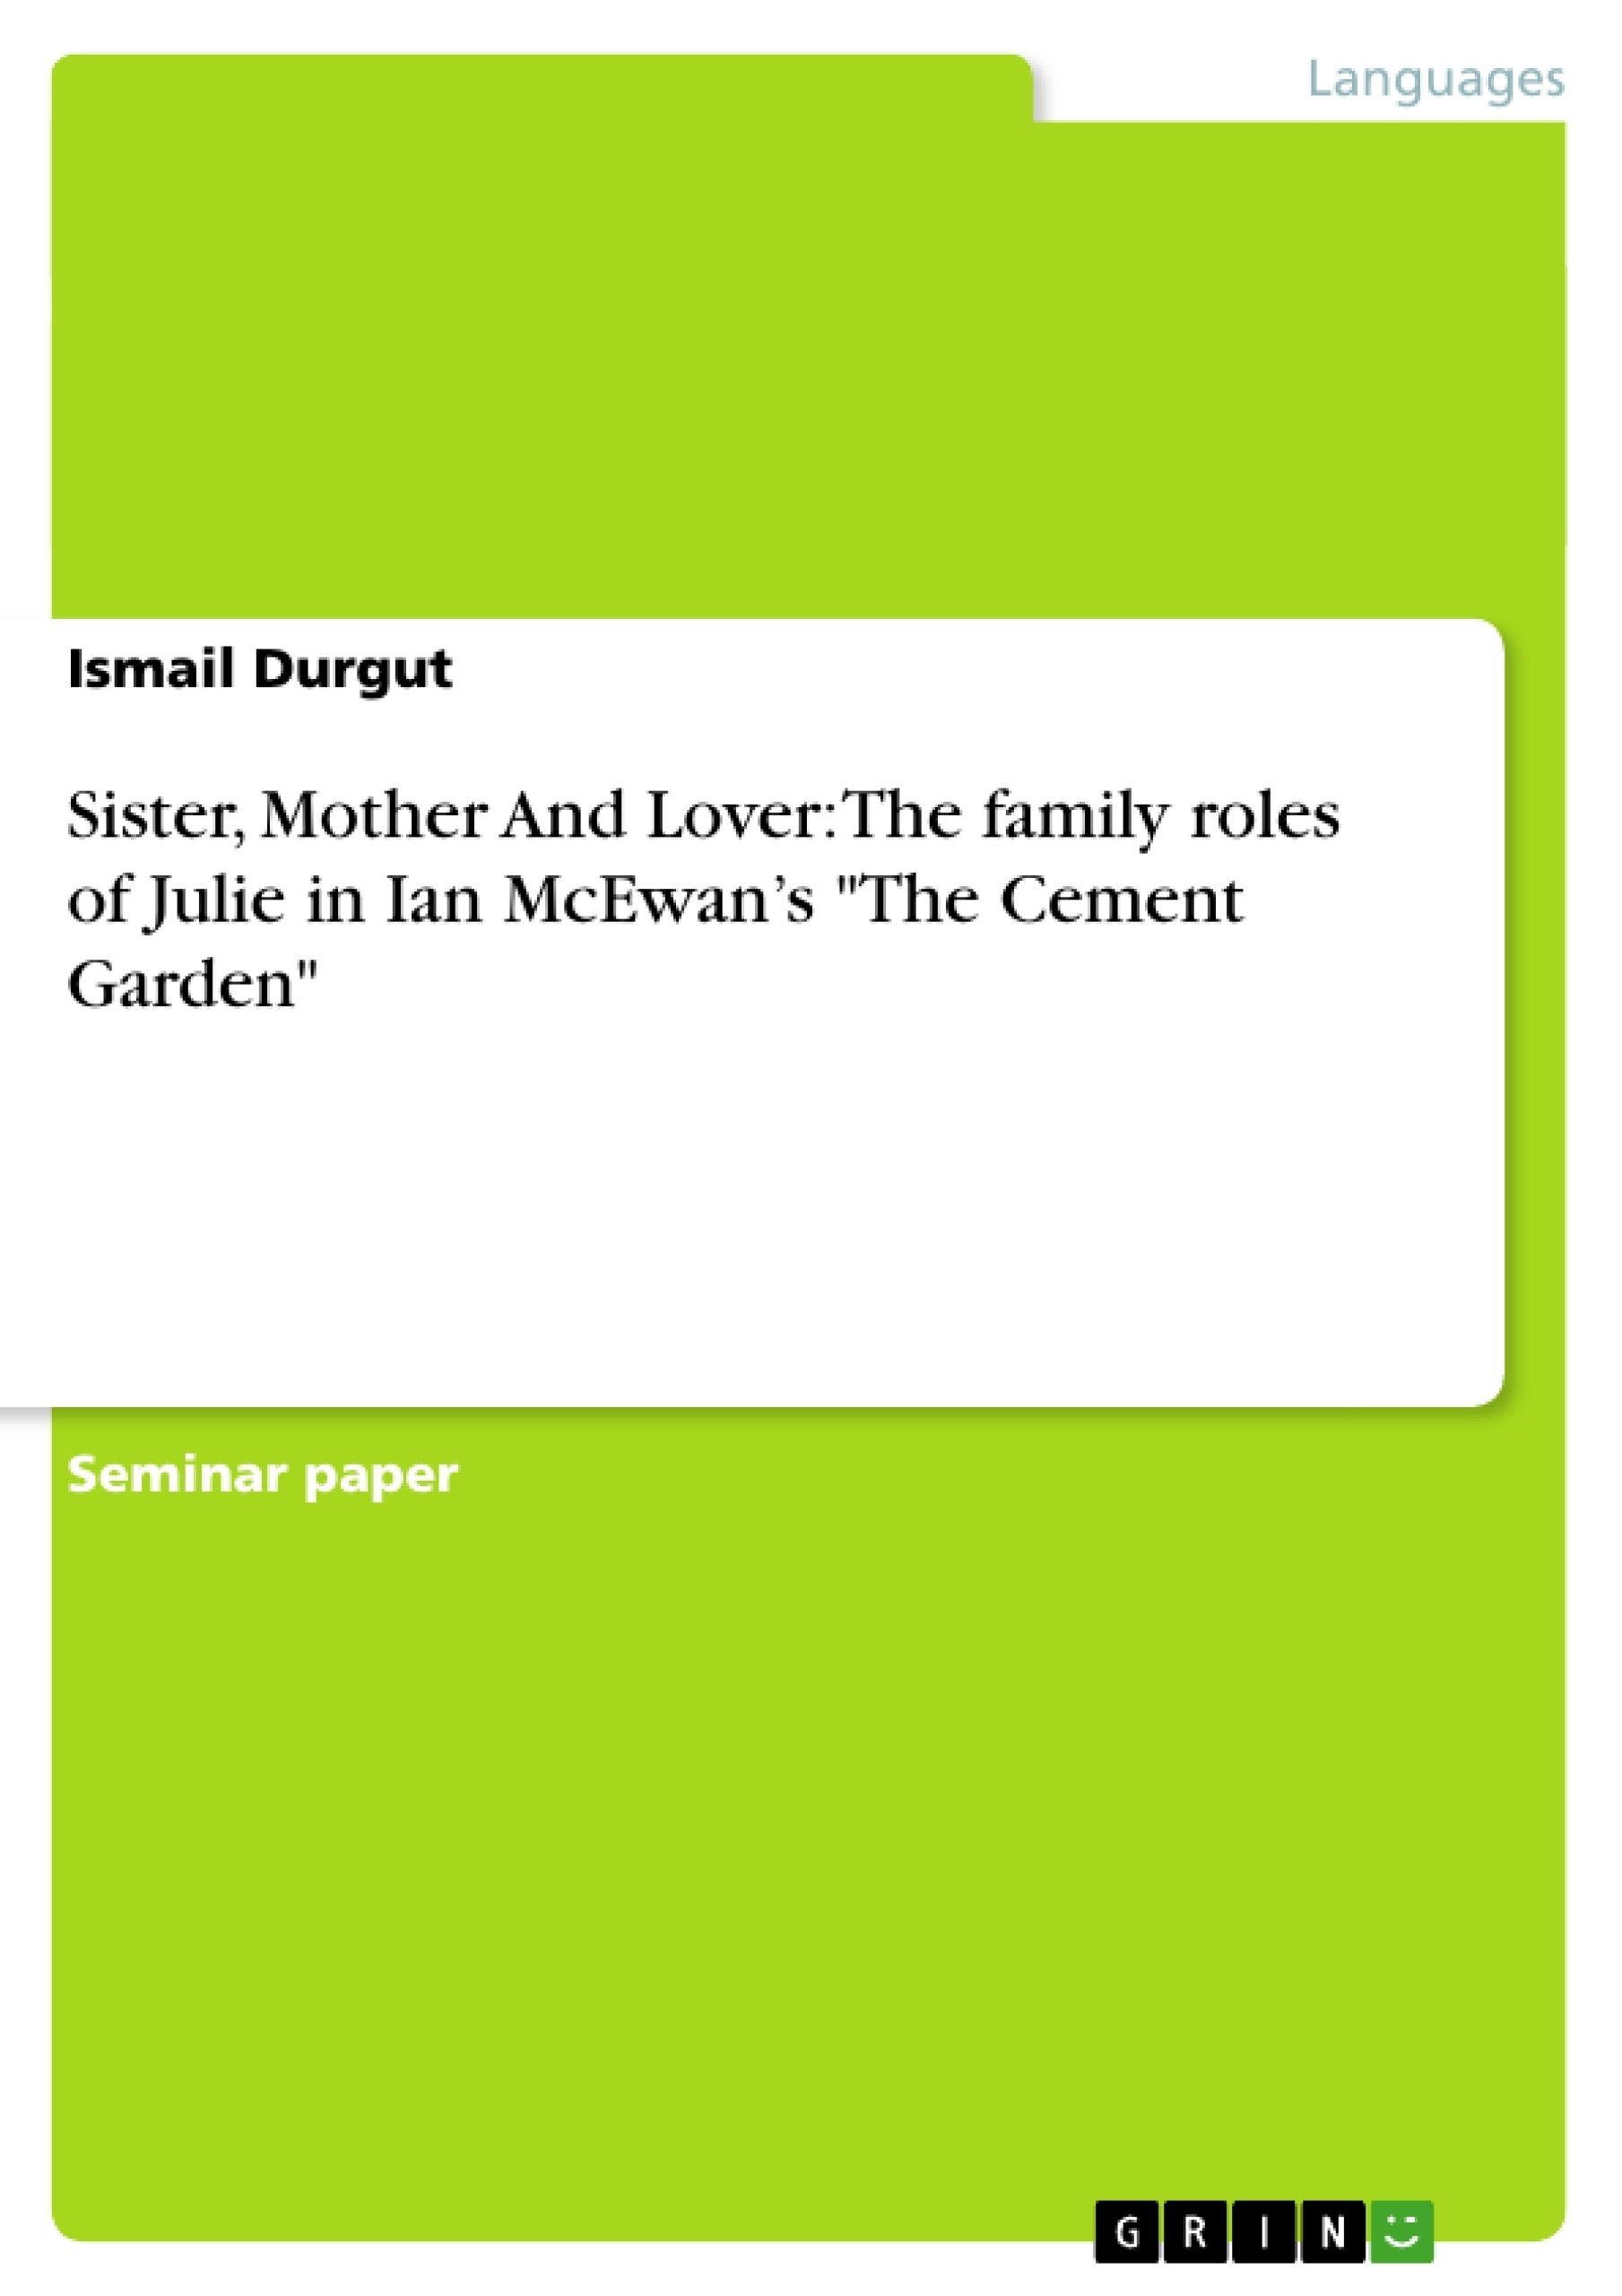 Titel: Sister, Mother And Lover: The family roles of Julie in Ian McEwan’s "The Cement Garden"